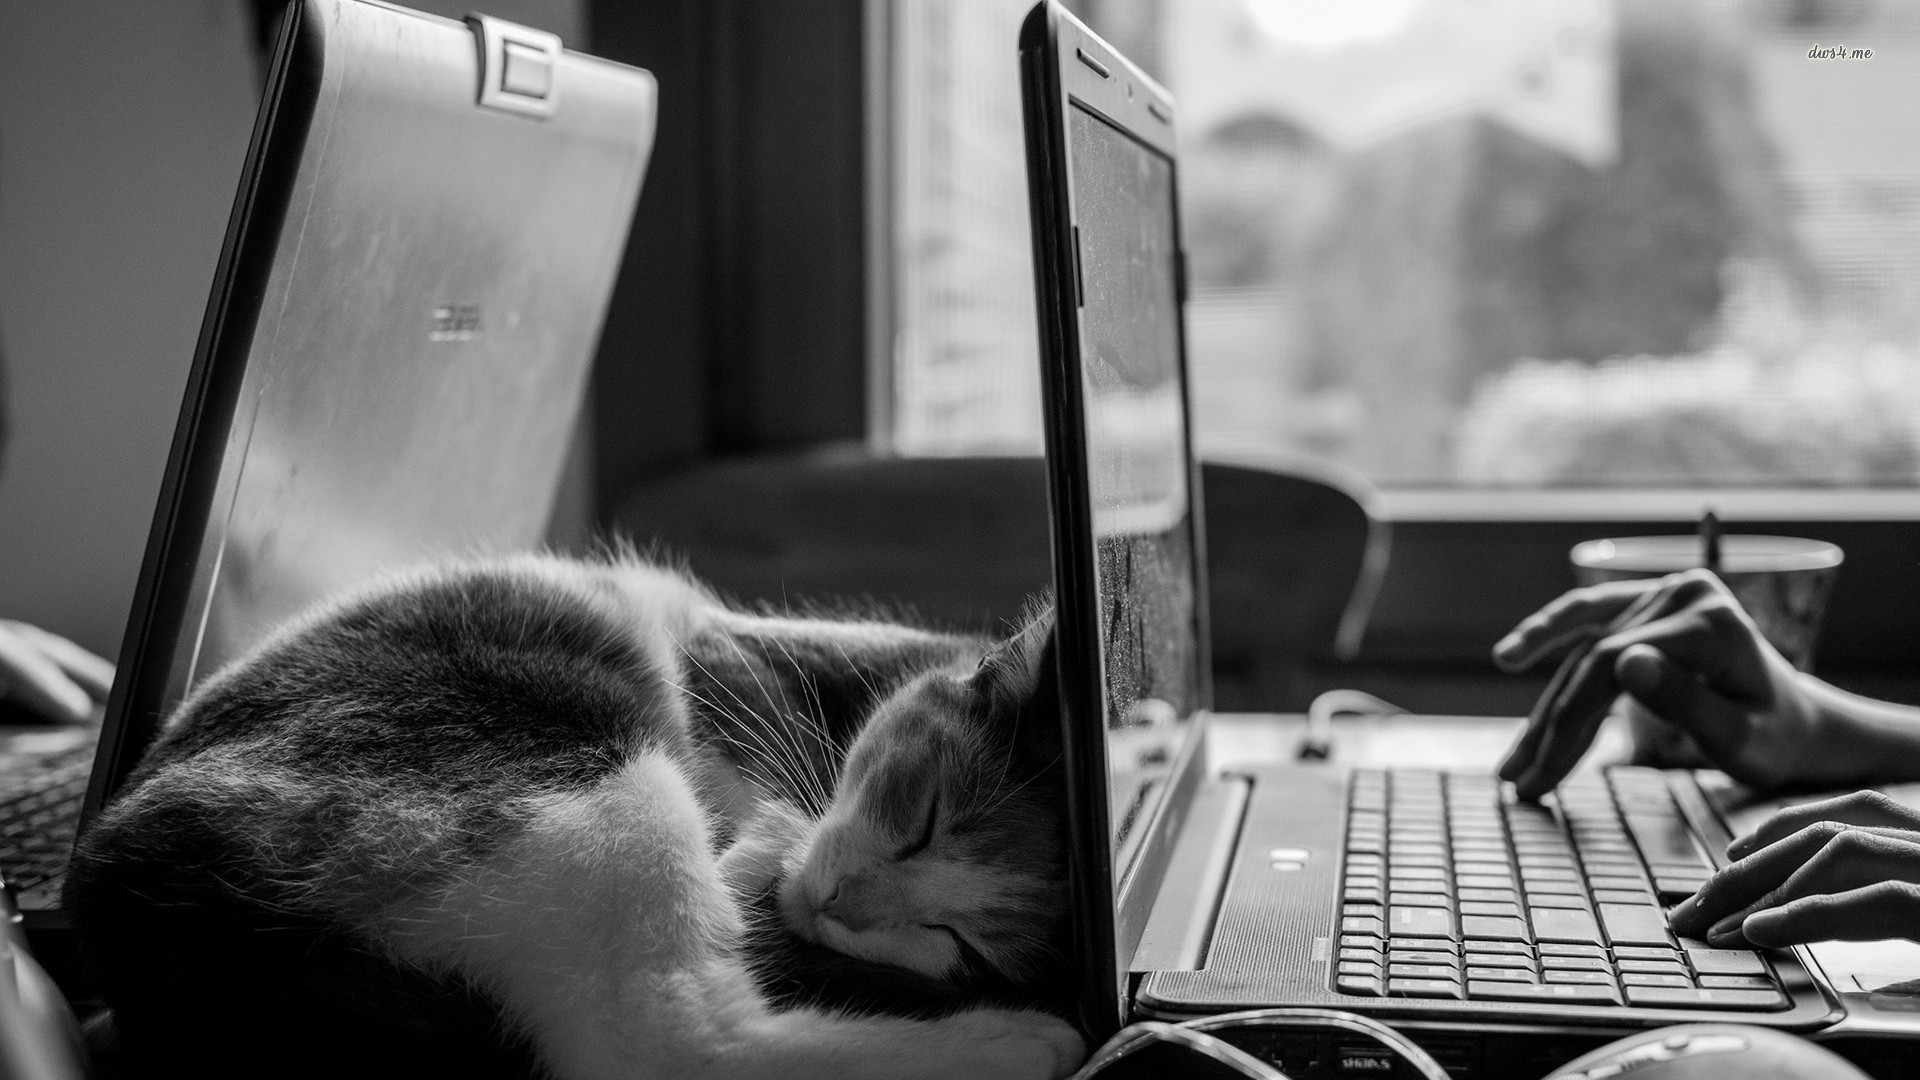 General 1920x1080 photography animals cats monochrome mammals laptop hands indoors sleeping technology mirrored cropped